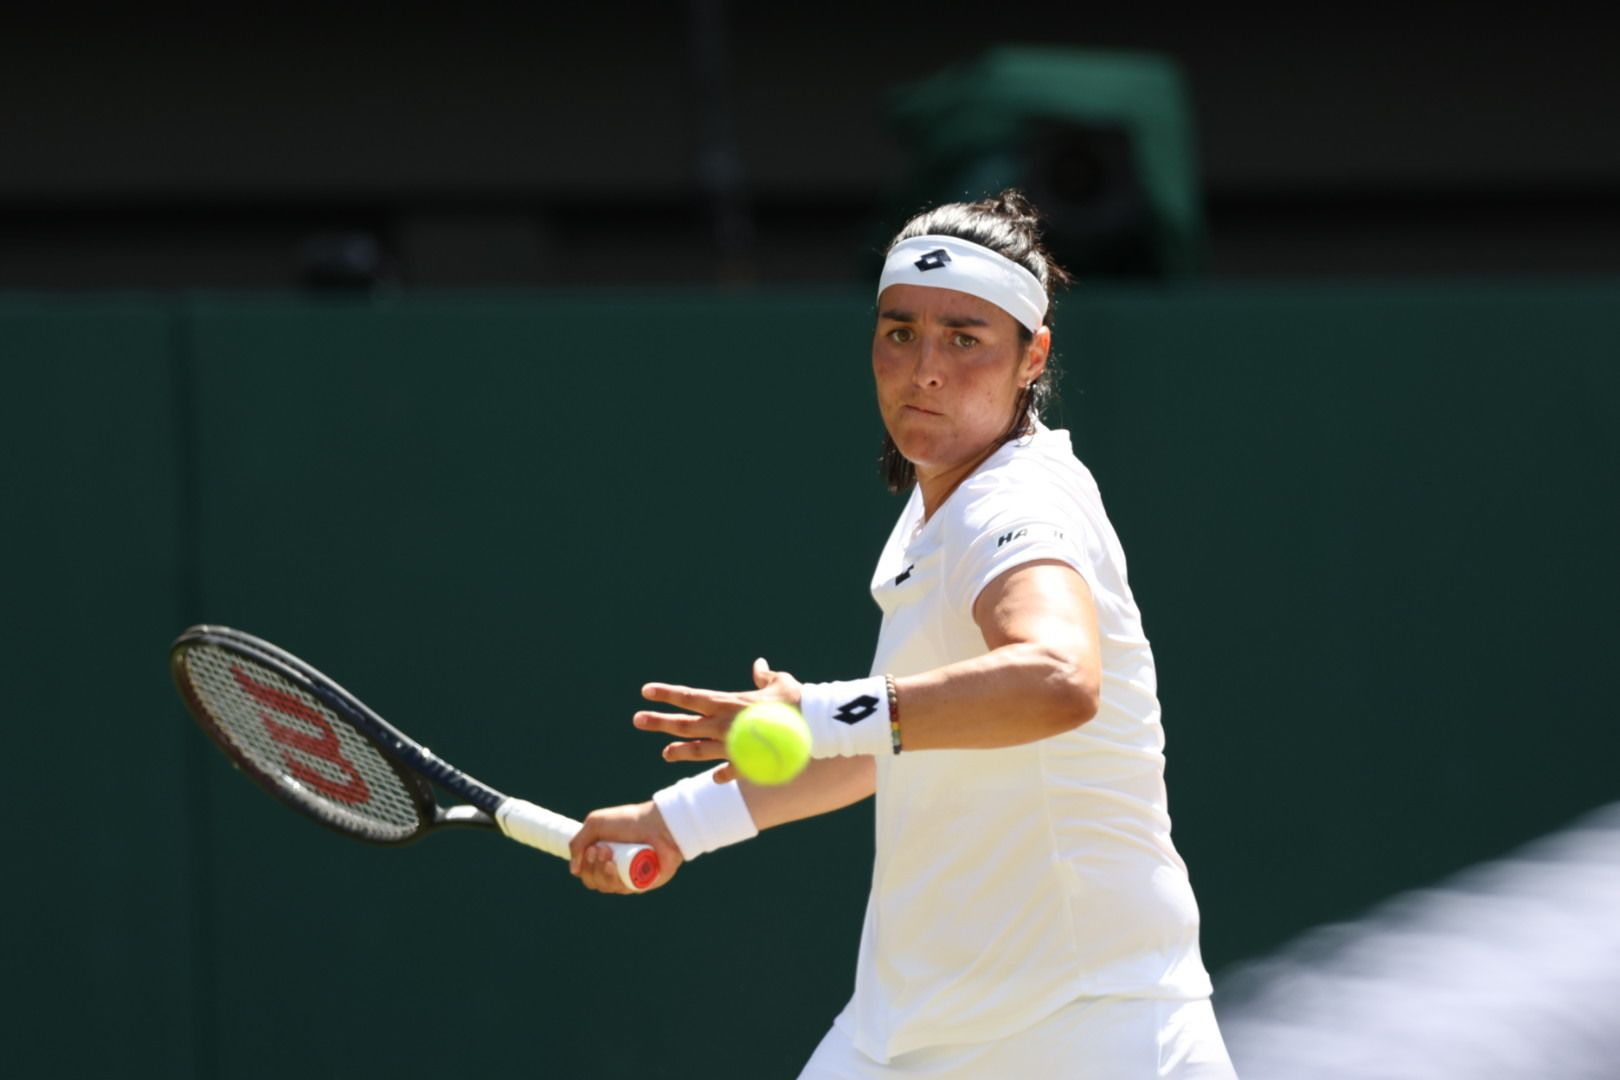 How to watch for free Elena Rybakina vs Ons Jabeur Wimbledon 2022 and on TV, @04:00 PM